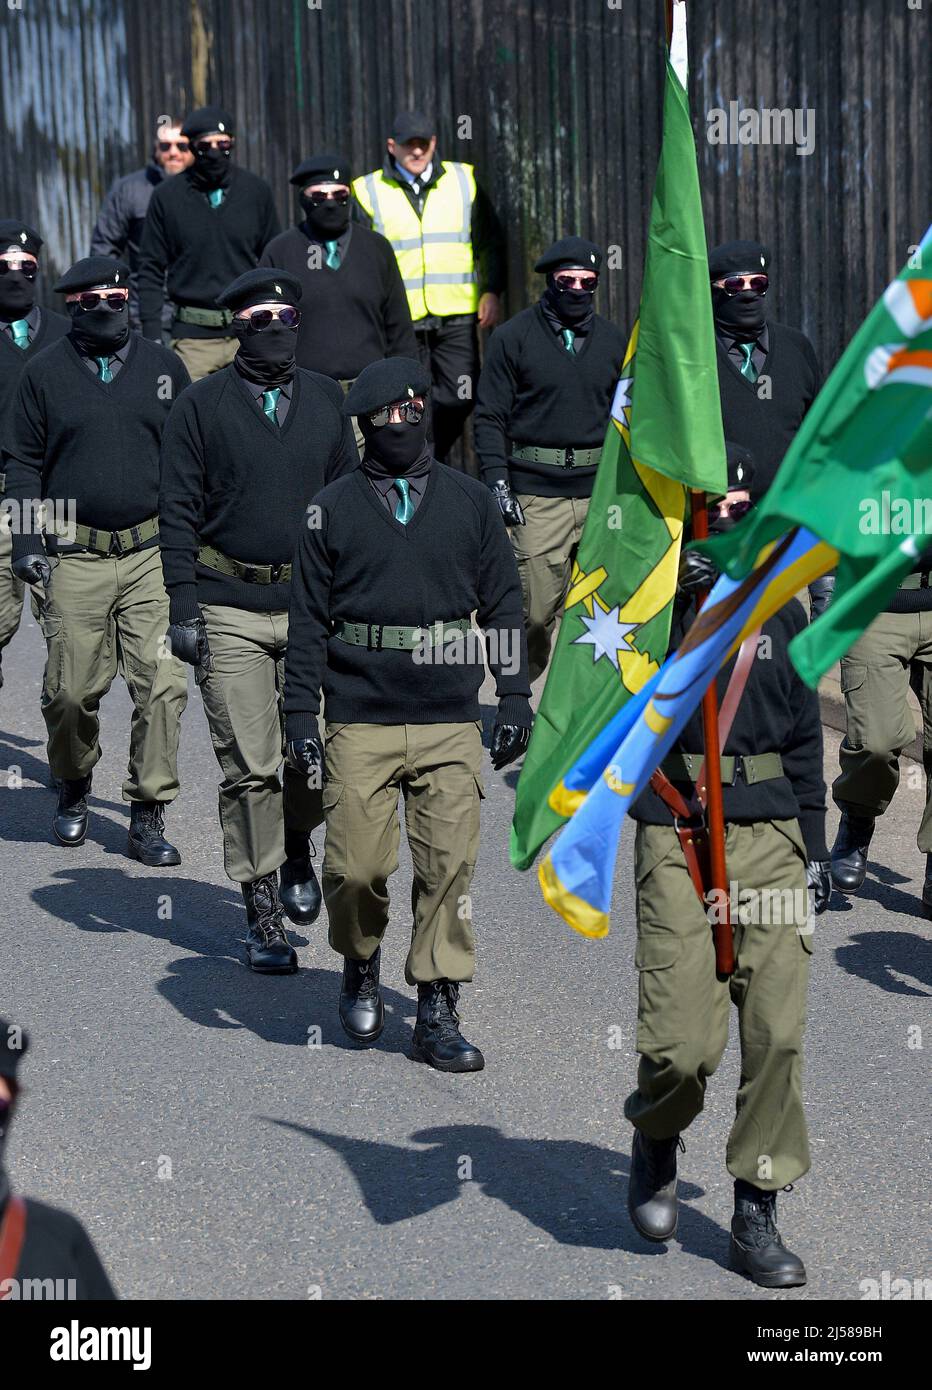 Masked men and women in paramilitary uniform at an Easter Monday Dissident Republican parade in Derry, Northern Ireland 18 March 2022. ©George Sweeney / Alamy Stock Photo Stock Photo